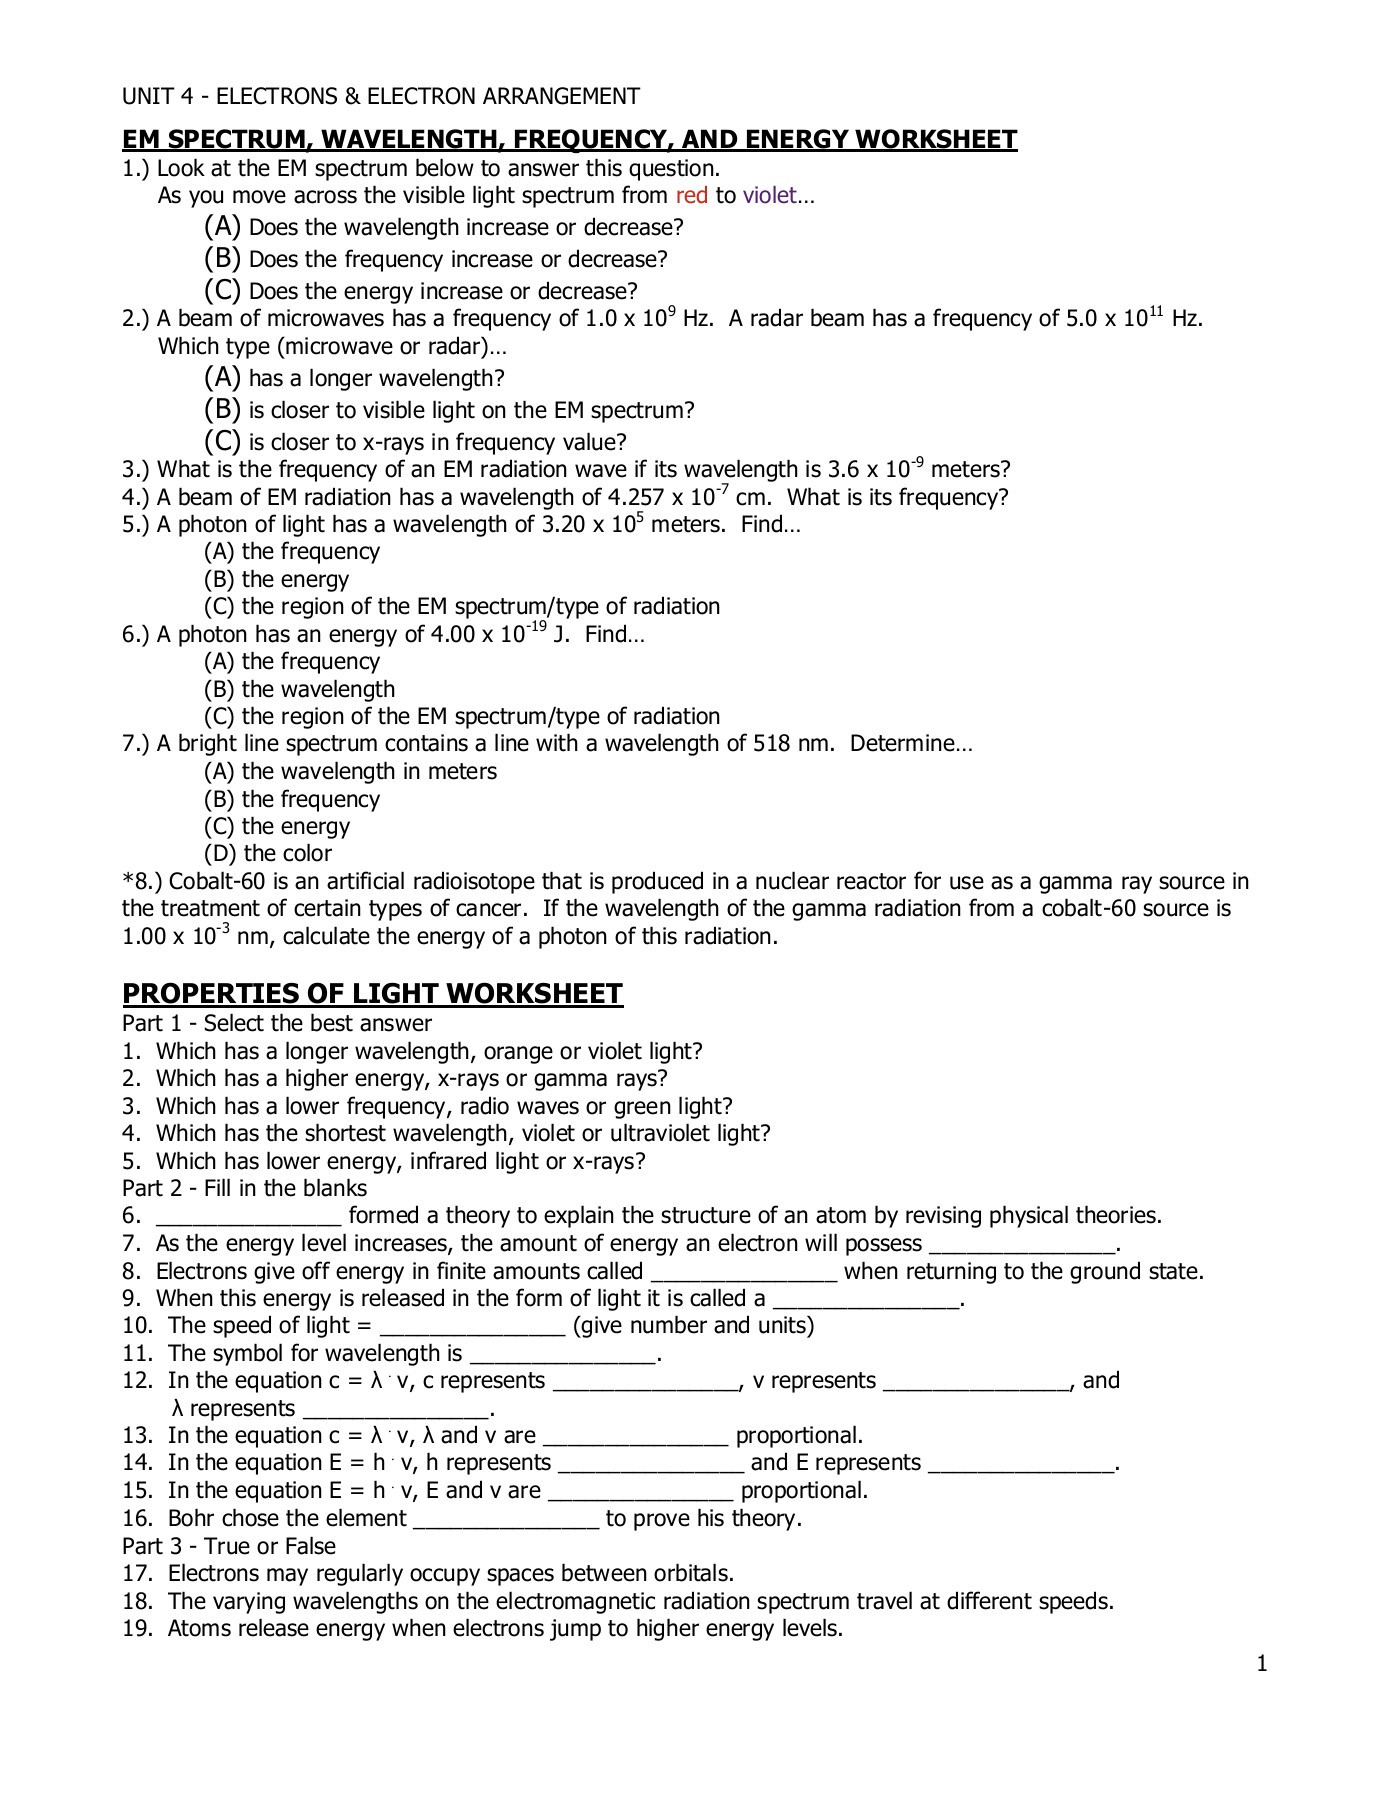 The Electromagnetic Spectrum Worksheet Answers Em Spectrum Wavelength Frequency and Energy Worksheet